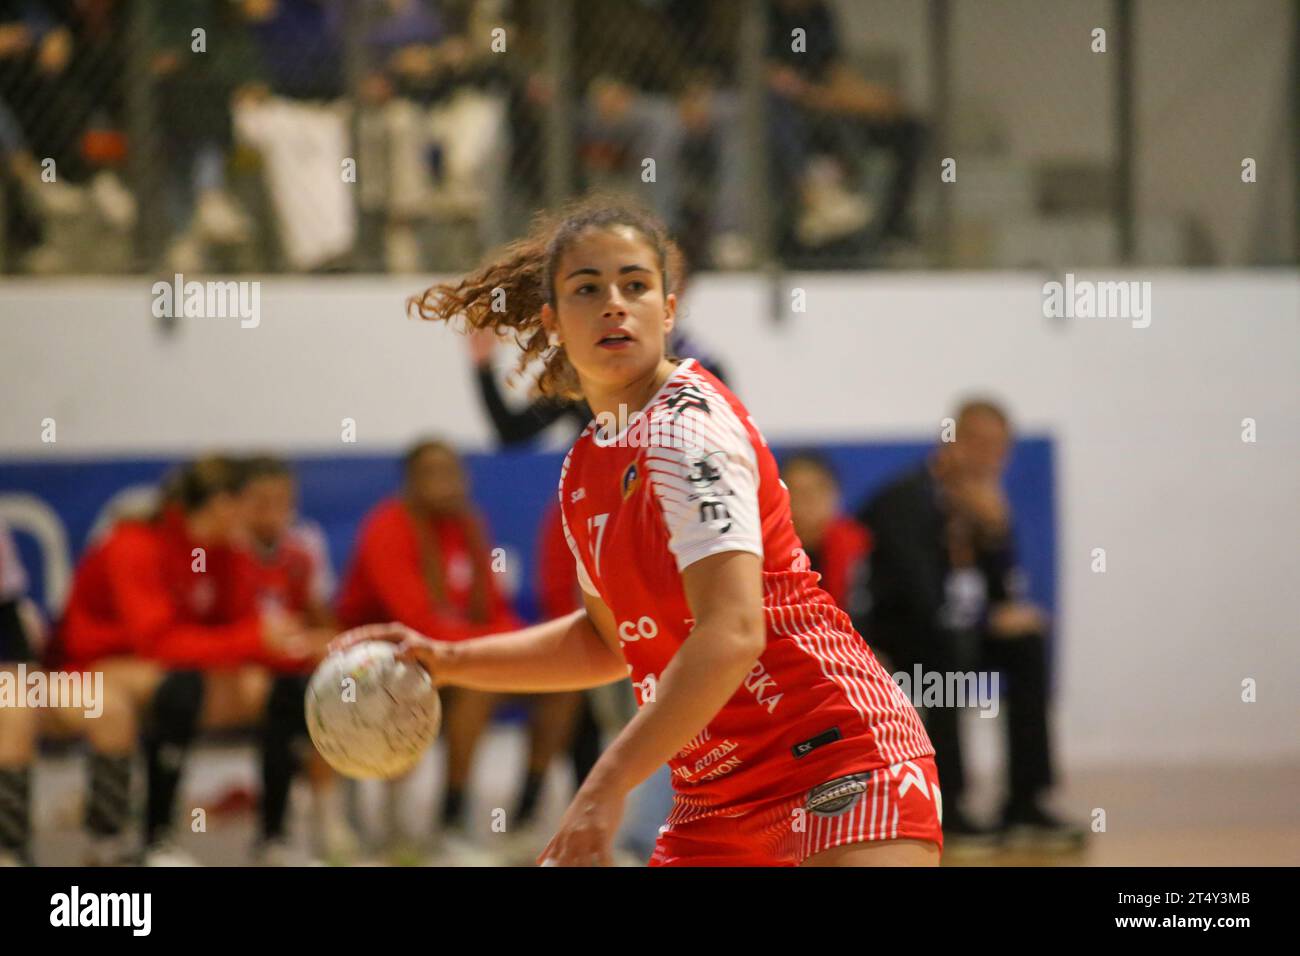 Oviedo, Spain. 1st Nov, 2023. The player of Motive.co Gijon Balonmano La Calzada, Rocio Rojas (57) with the ball during the 9th Matchday of the Liga Guerreras Iberdrola between Lobas Global Atac Oviedo and Motive.co Gijon Balonmano La Calzada, on November 1, 2023, at the Florida Arena Municipal Sports Center, in Oviedo, Spain. (Photo by Alberto Brevers/Pacific Press) Credit: Pacific Press Media Production Corp./Alamy Live News Stock Photo